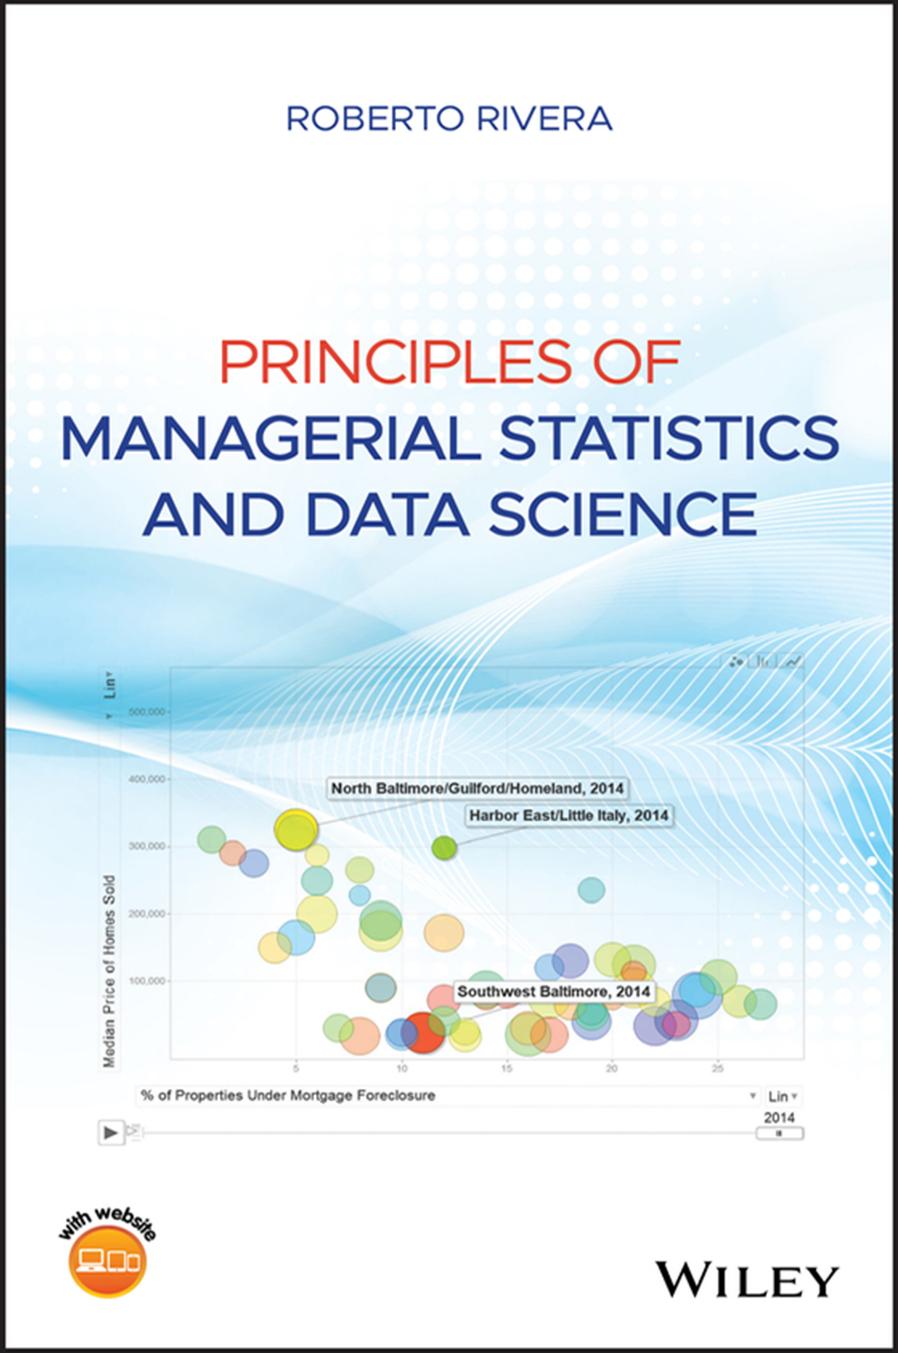 Principles of Managerial Statistics and Data Science by Roberto Rivera